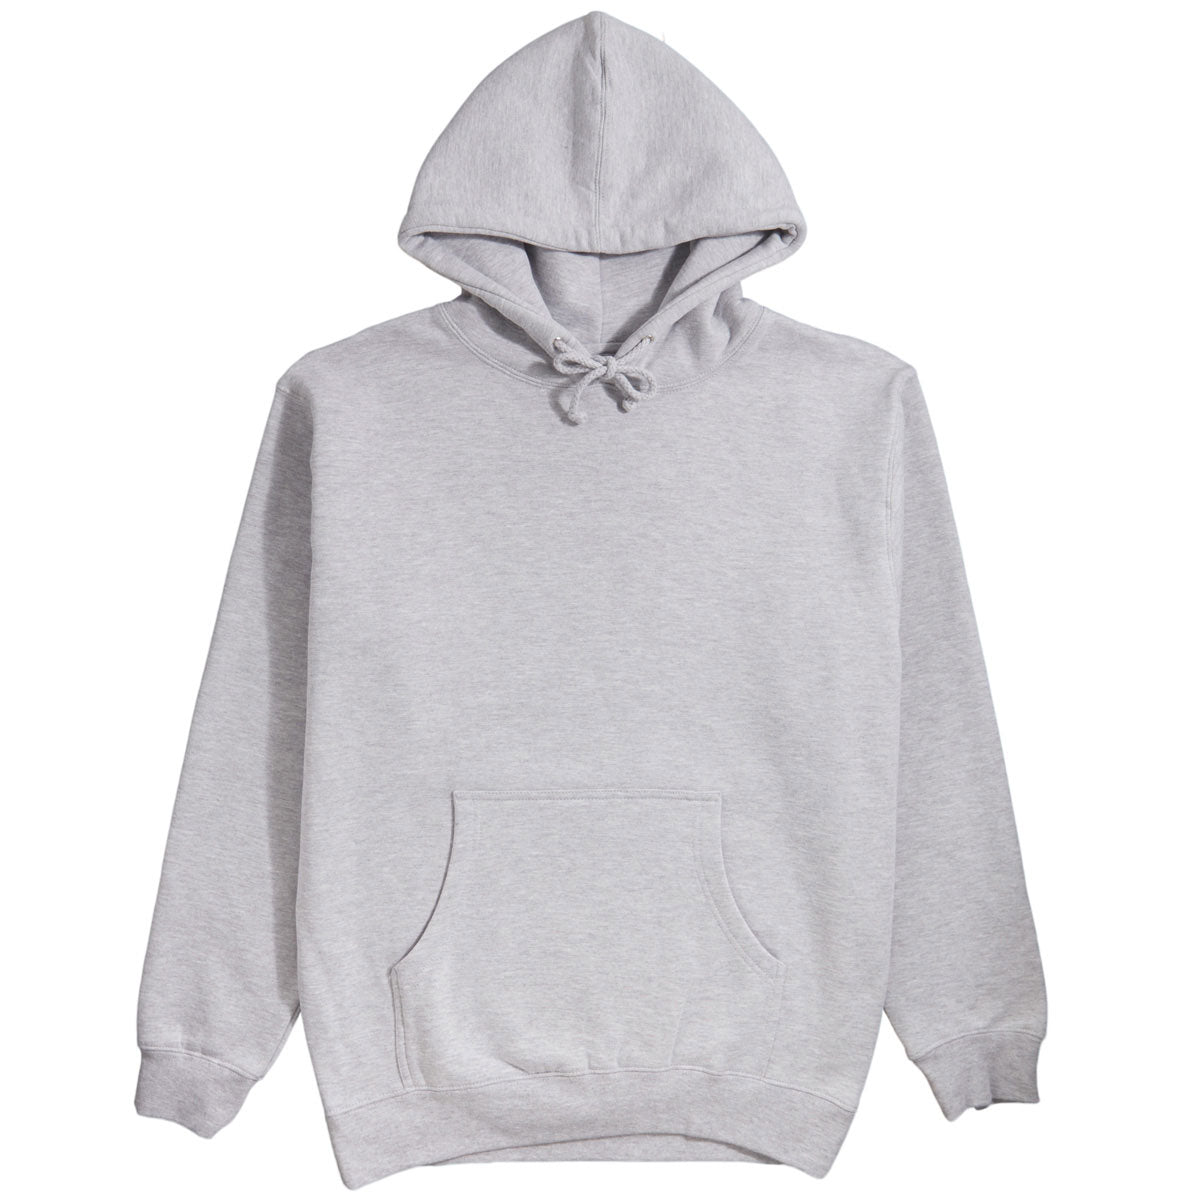 Converse Body Horror Pullover Hoodie - Heather Grey - MD image 1